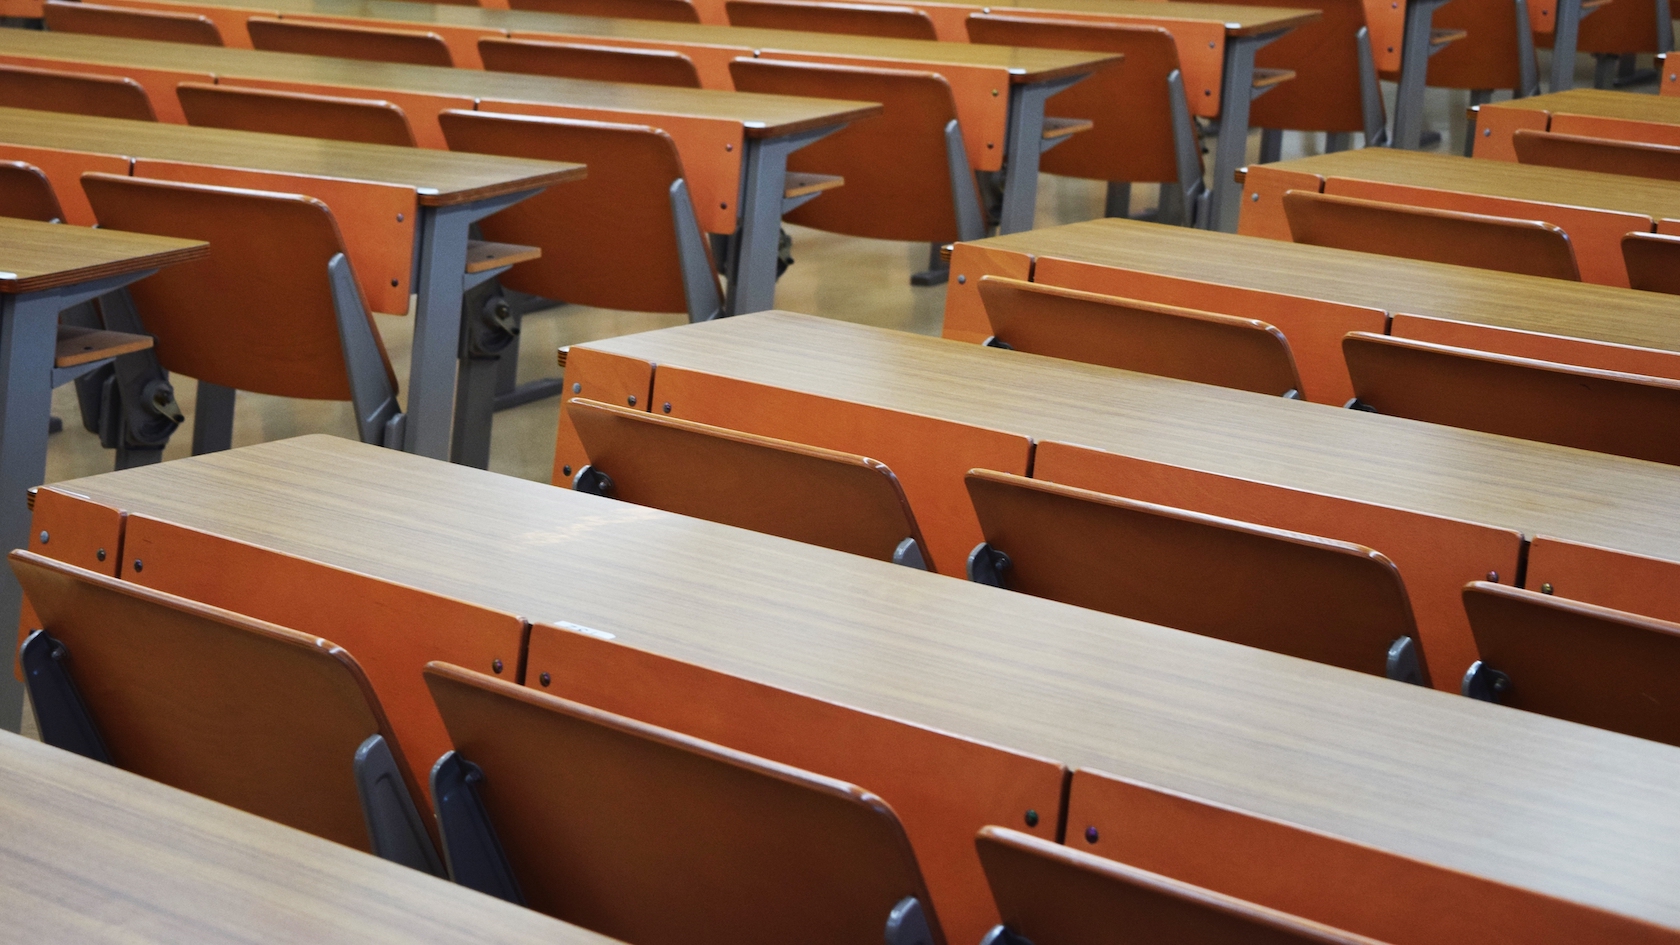 Adobe Stock 306872208. Desks in a Japanese university lecture hall.